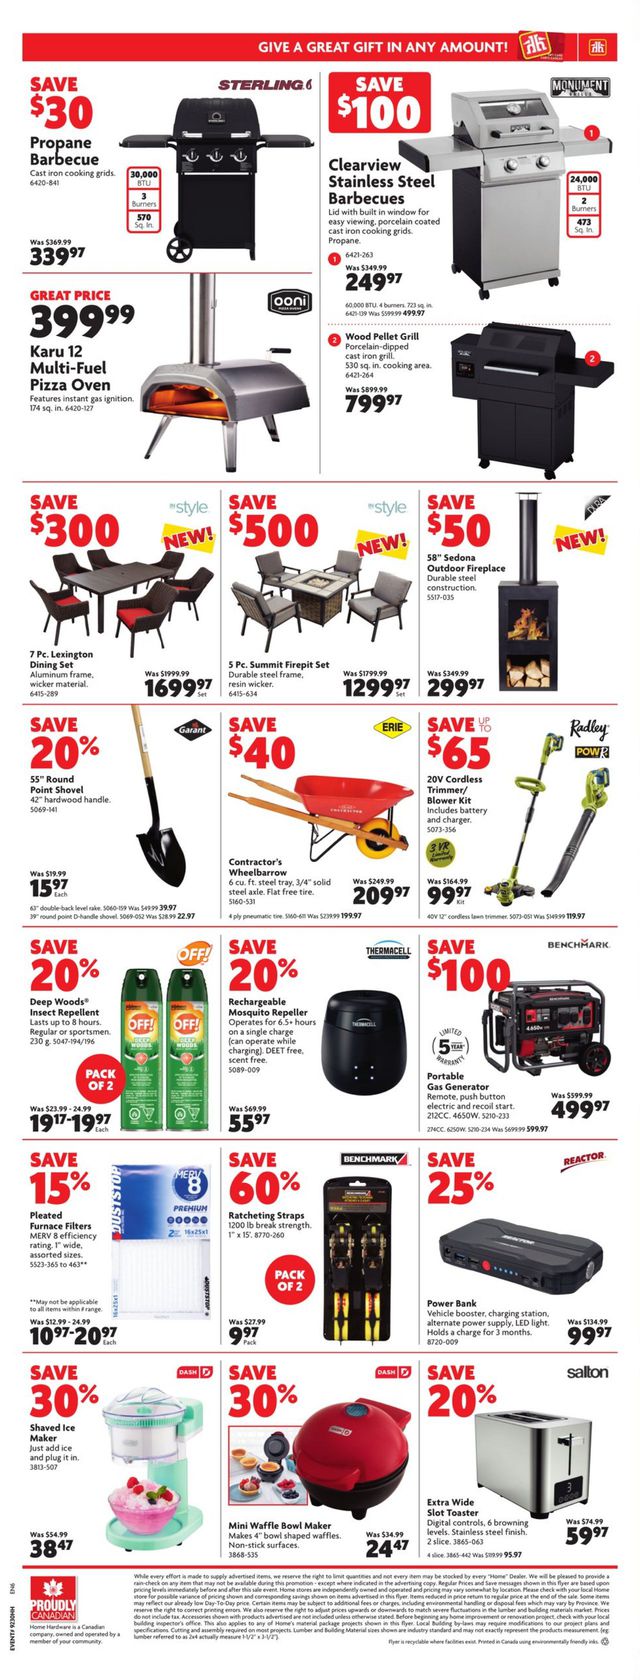 Home Hardware Flyer from 07/27/2023